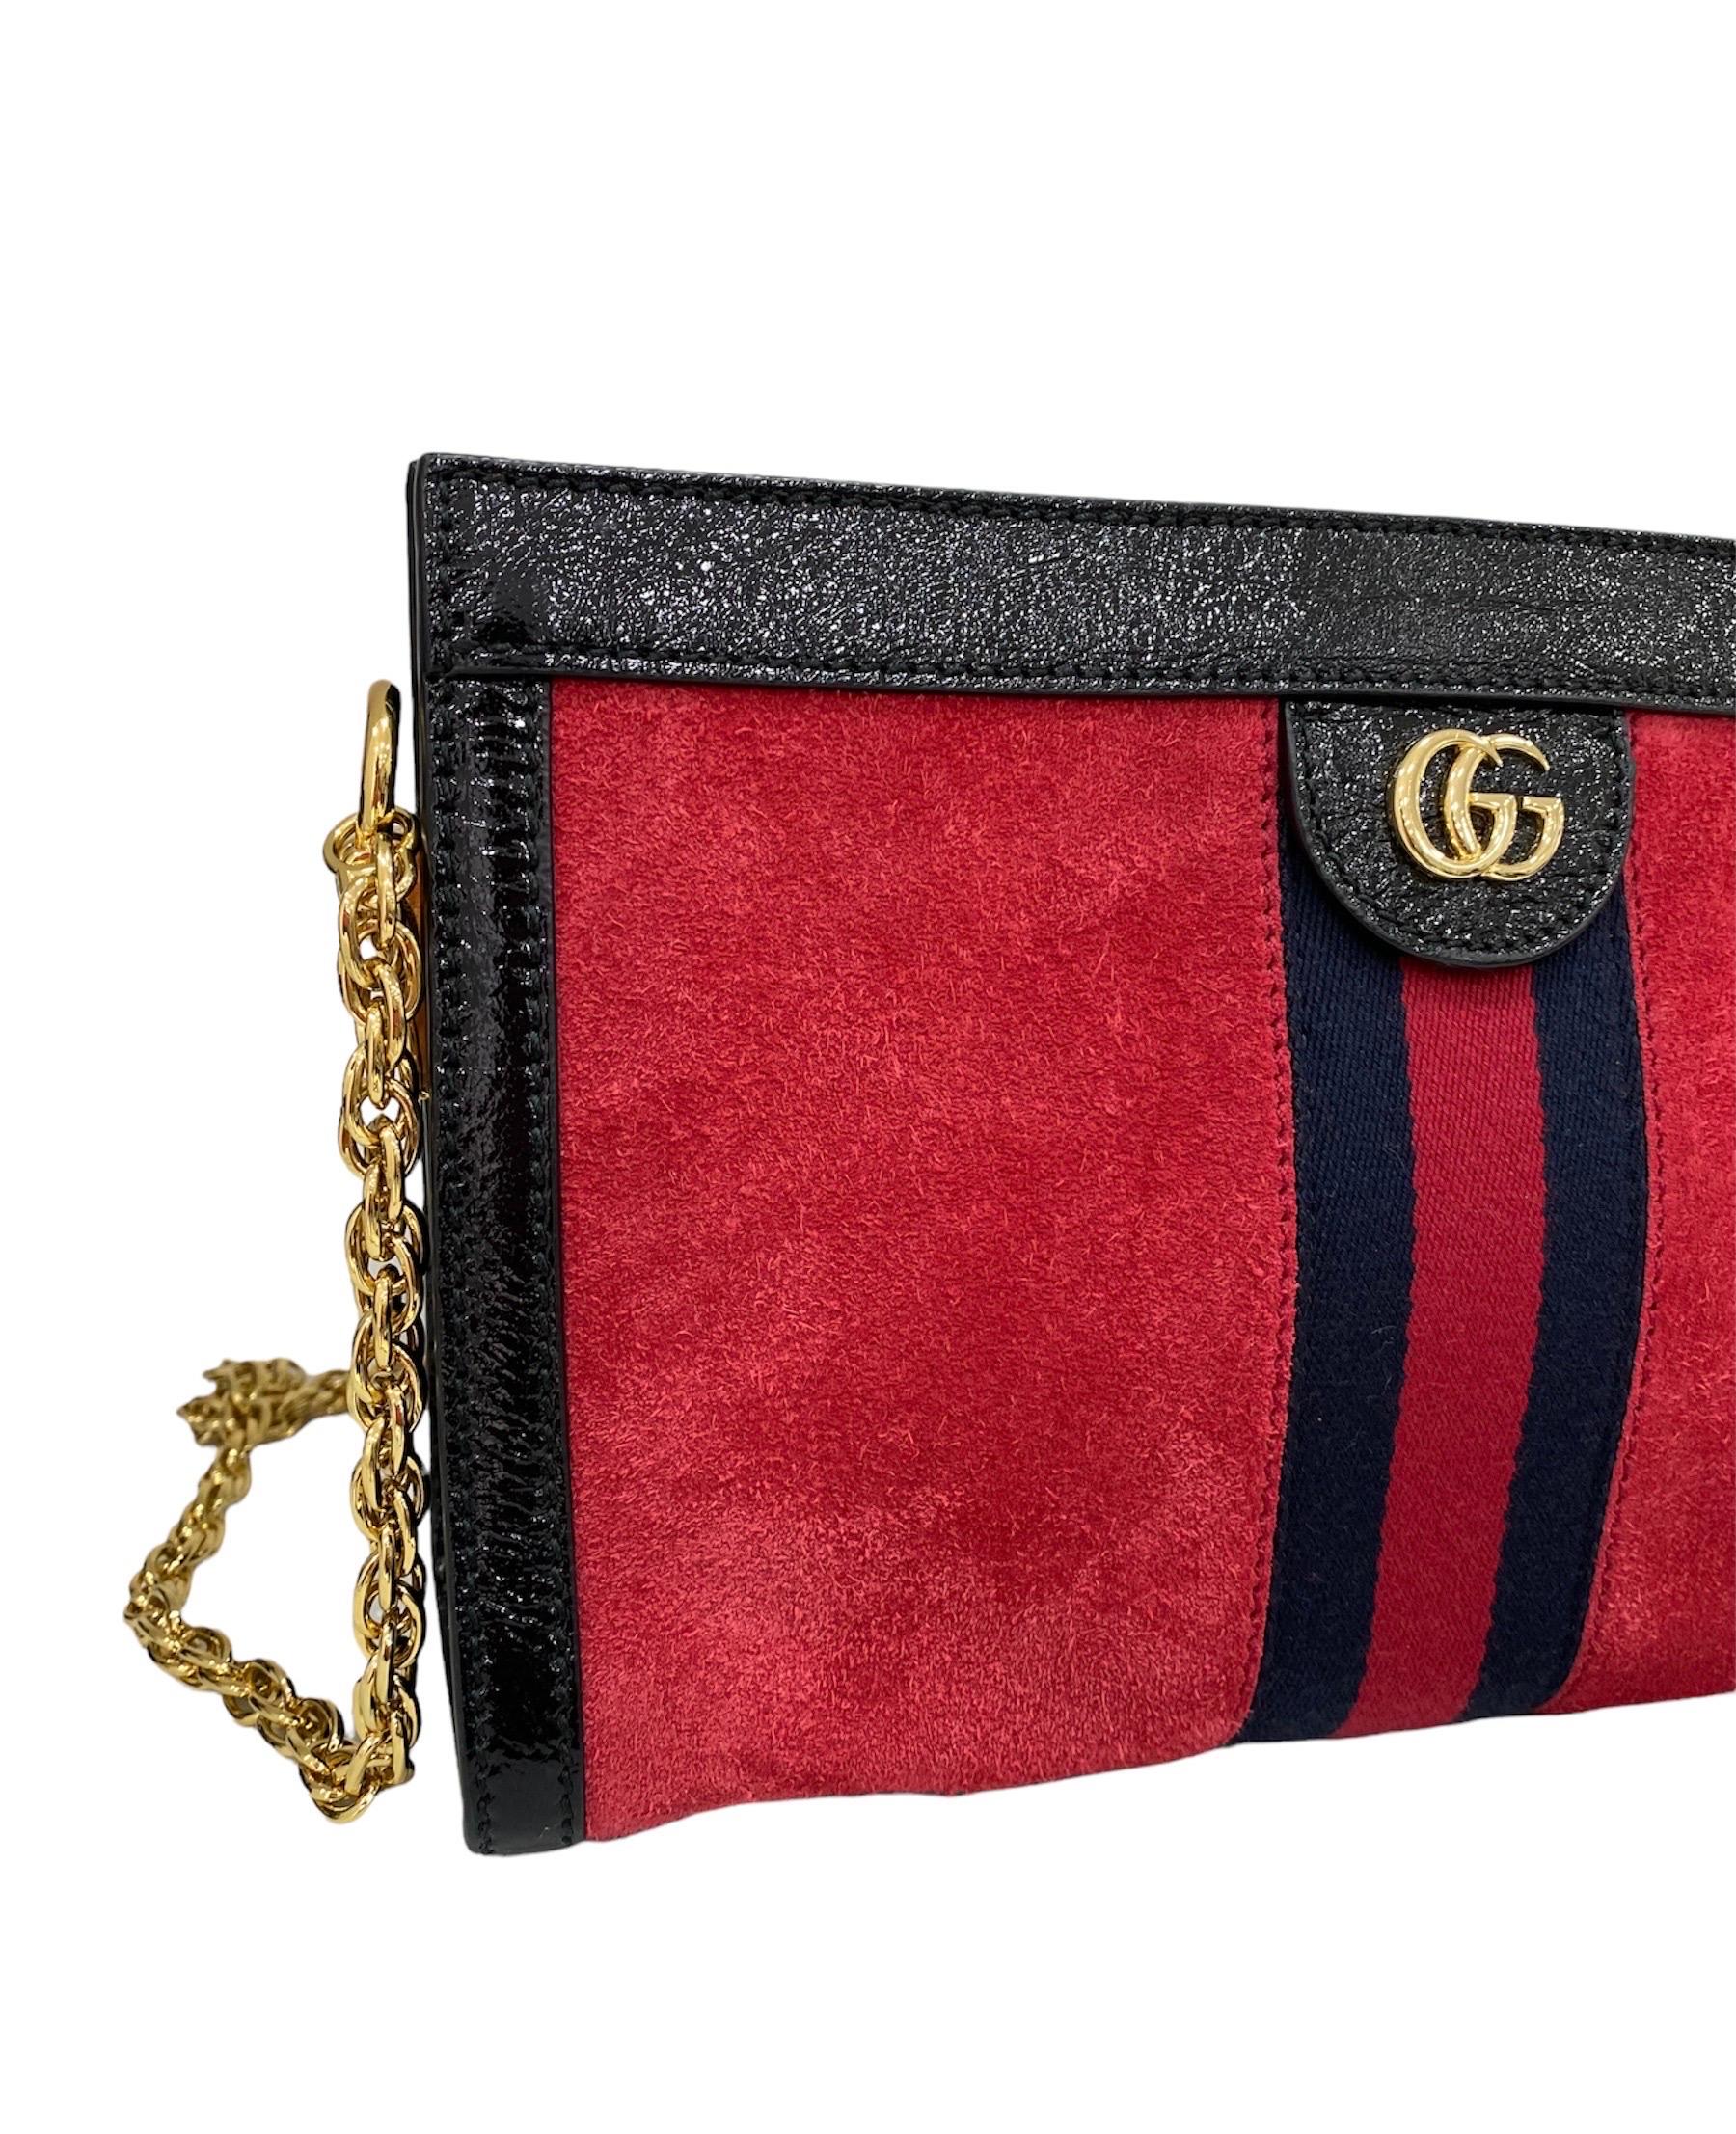 Gucci shoulder bag, Ophidia line, made of red suede with black patent inserts and golden hardware.

Equipped with a magnetic closure, internally lined in turquoise satin, quite roomy.

Equipped with a removable chain shoulder strap and internal